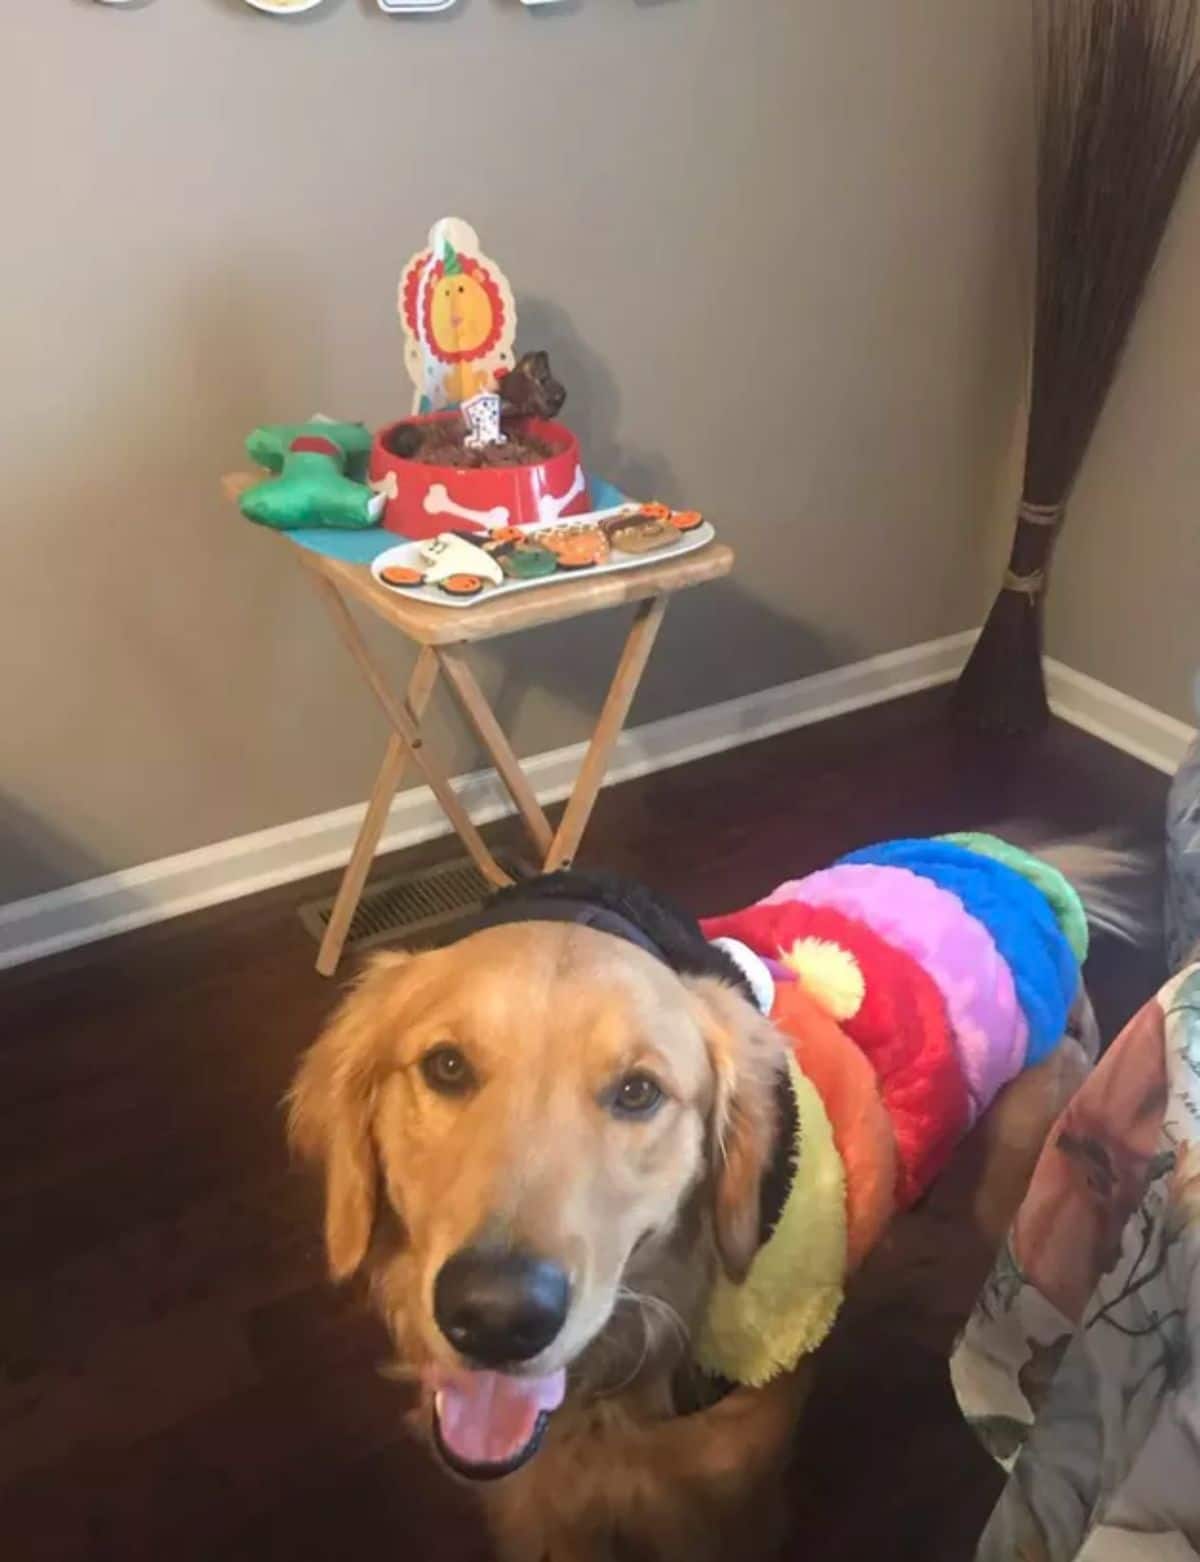 golden retriever in a rainbow shirt with a birthday cake behind it on a table